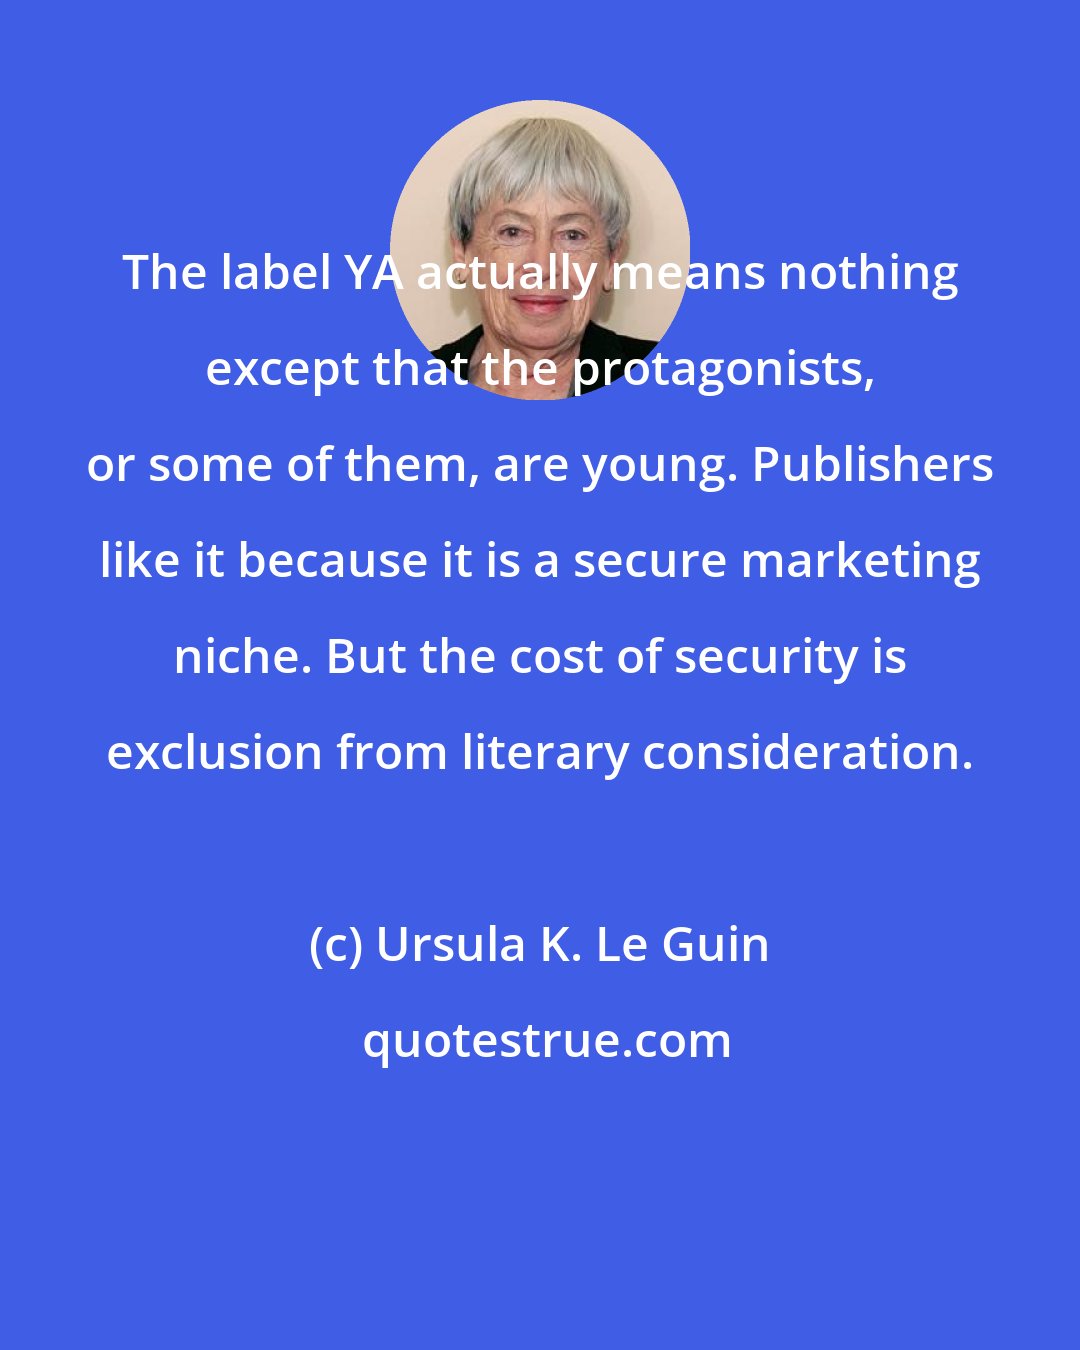 Ursula K. Le Guin: The label YA actually means nothing except that the protagonists, or some of them, are young. Publishers like it because it is a secure marketing niche. But the cost of security is exclusion from literary consideration.